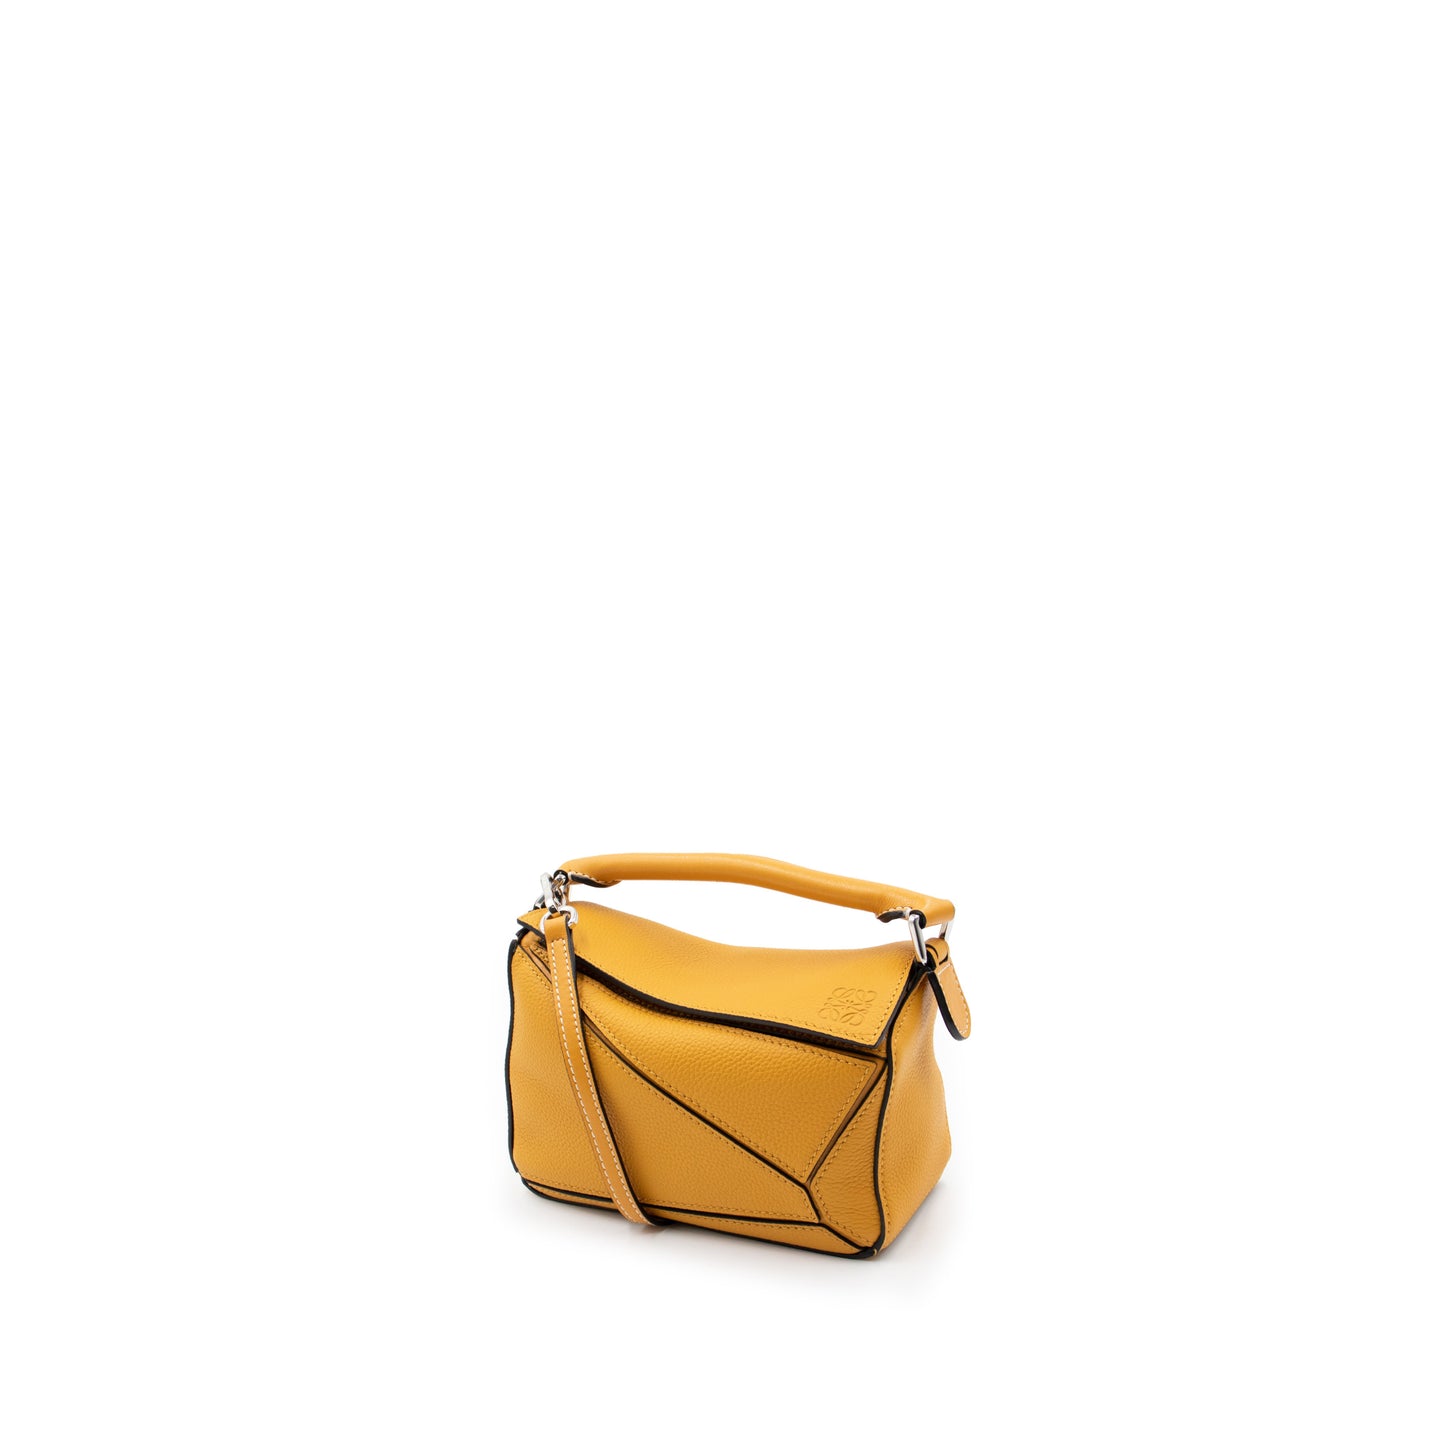 Mini Puzzle Bag in Soft Grained Calfskin in Sunflower